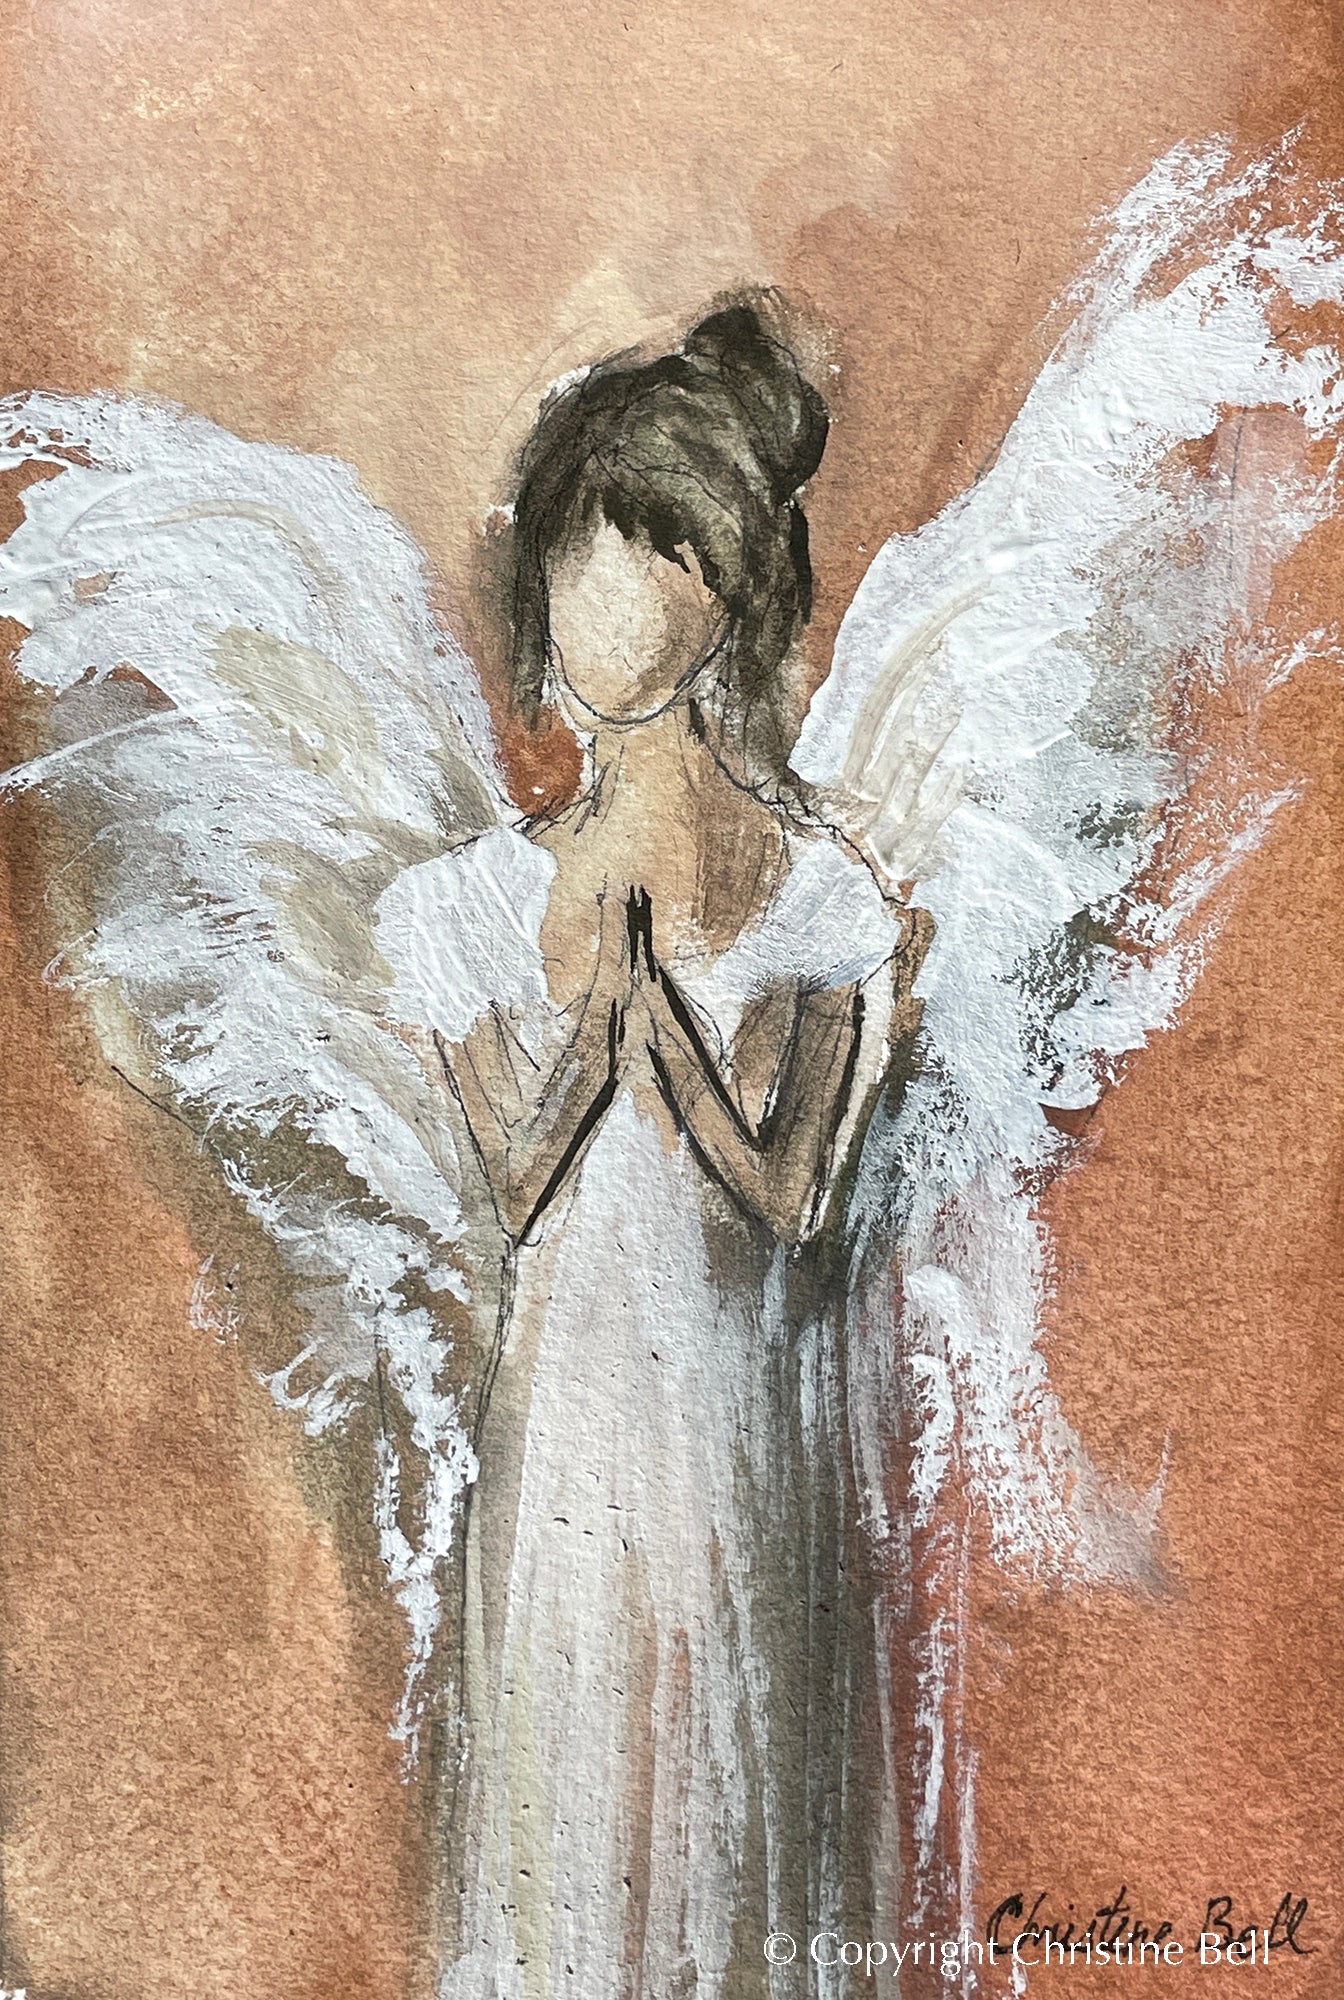 ORIGINAL Angel Painting Gold Guardian Angel Vintage Paper Framed Decor –  Contemporary Art by Christine